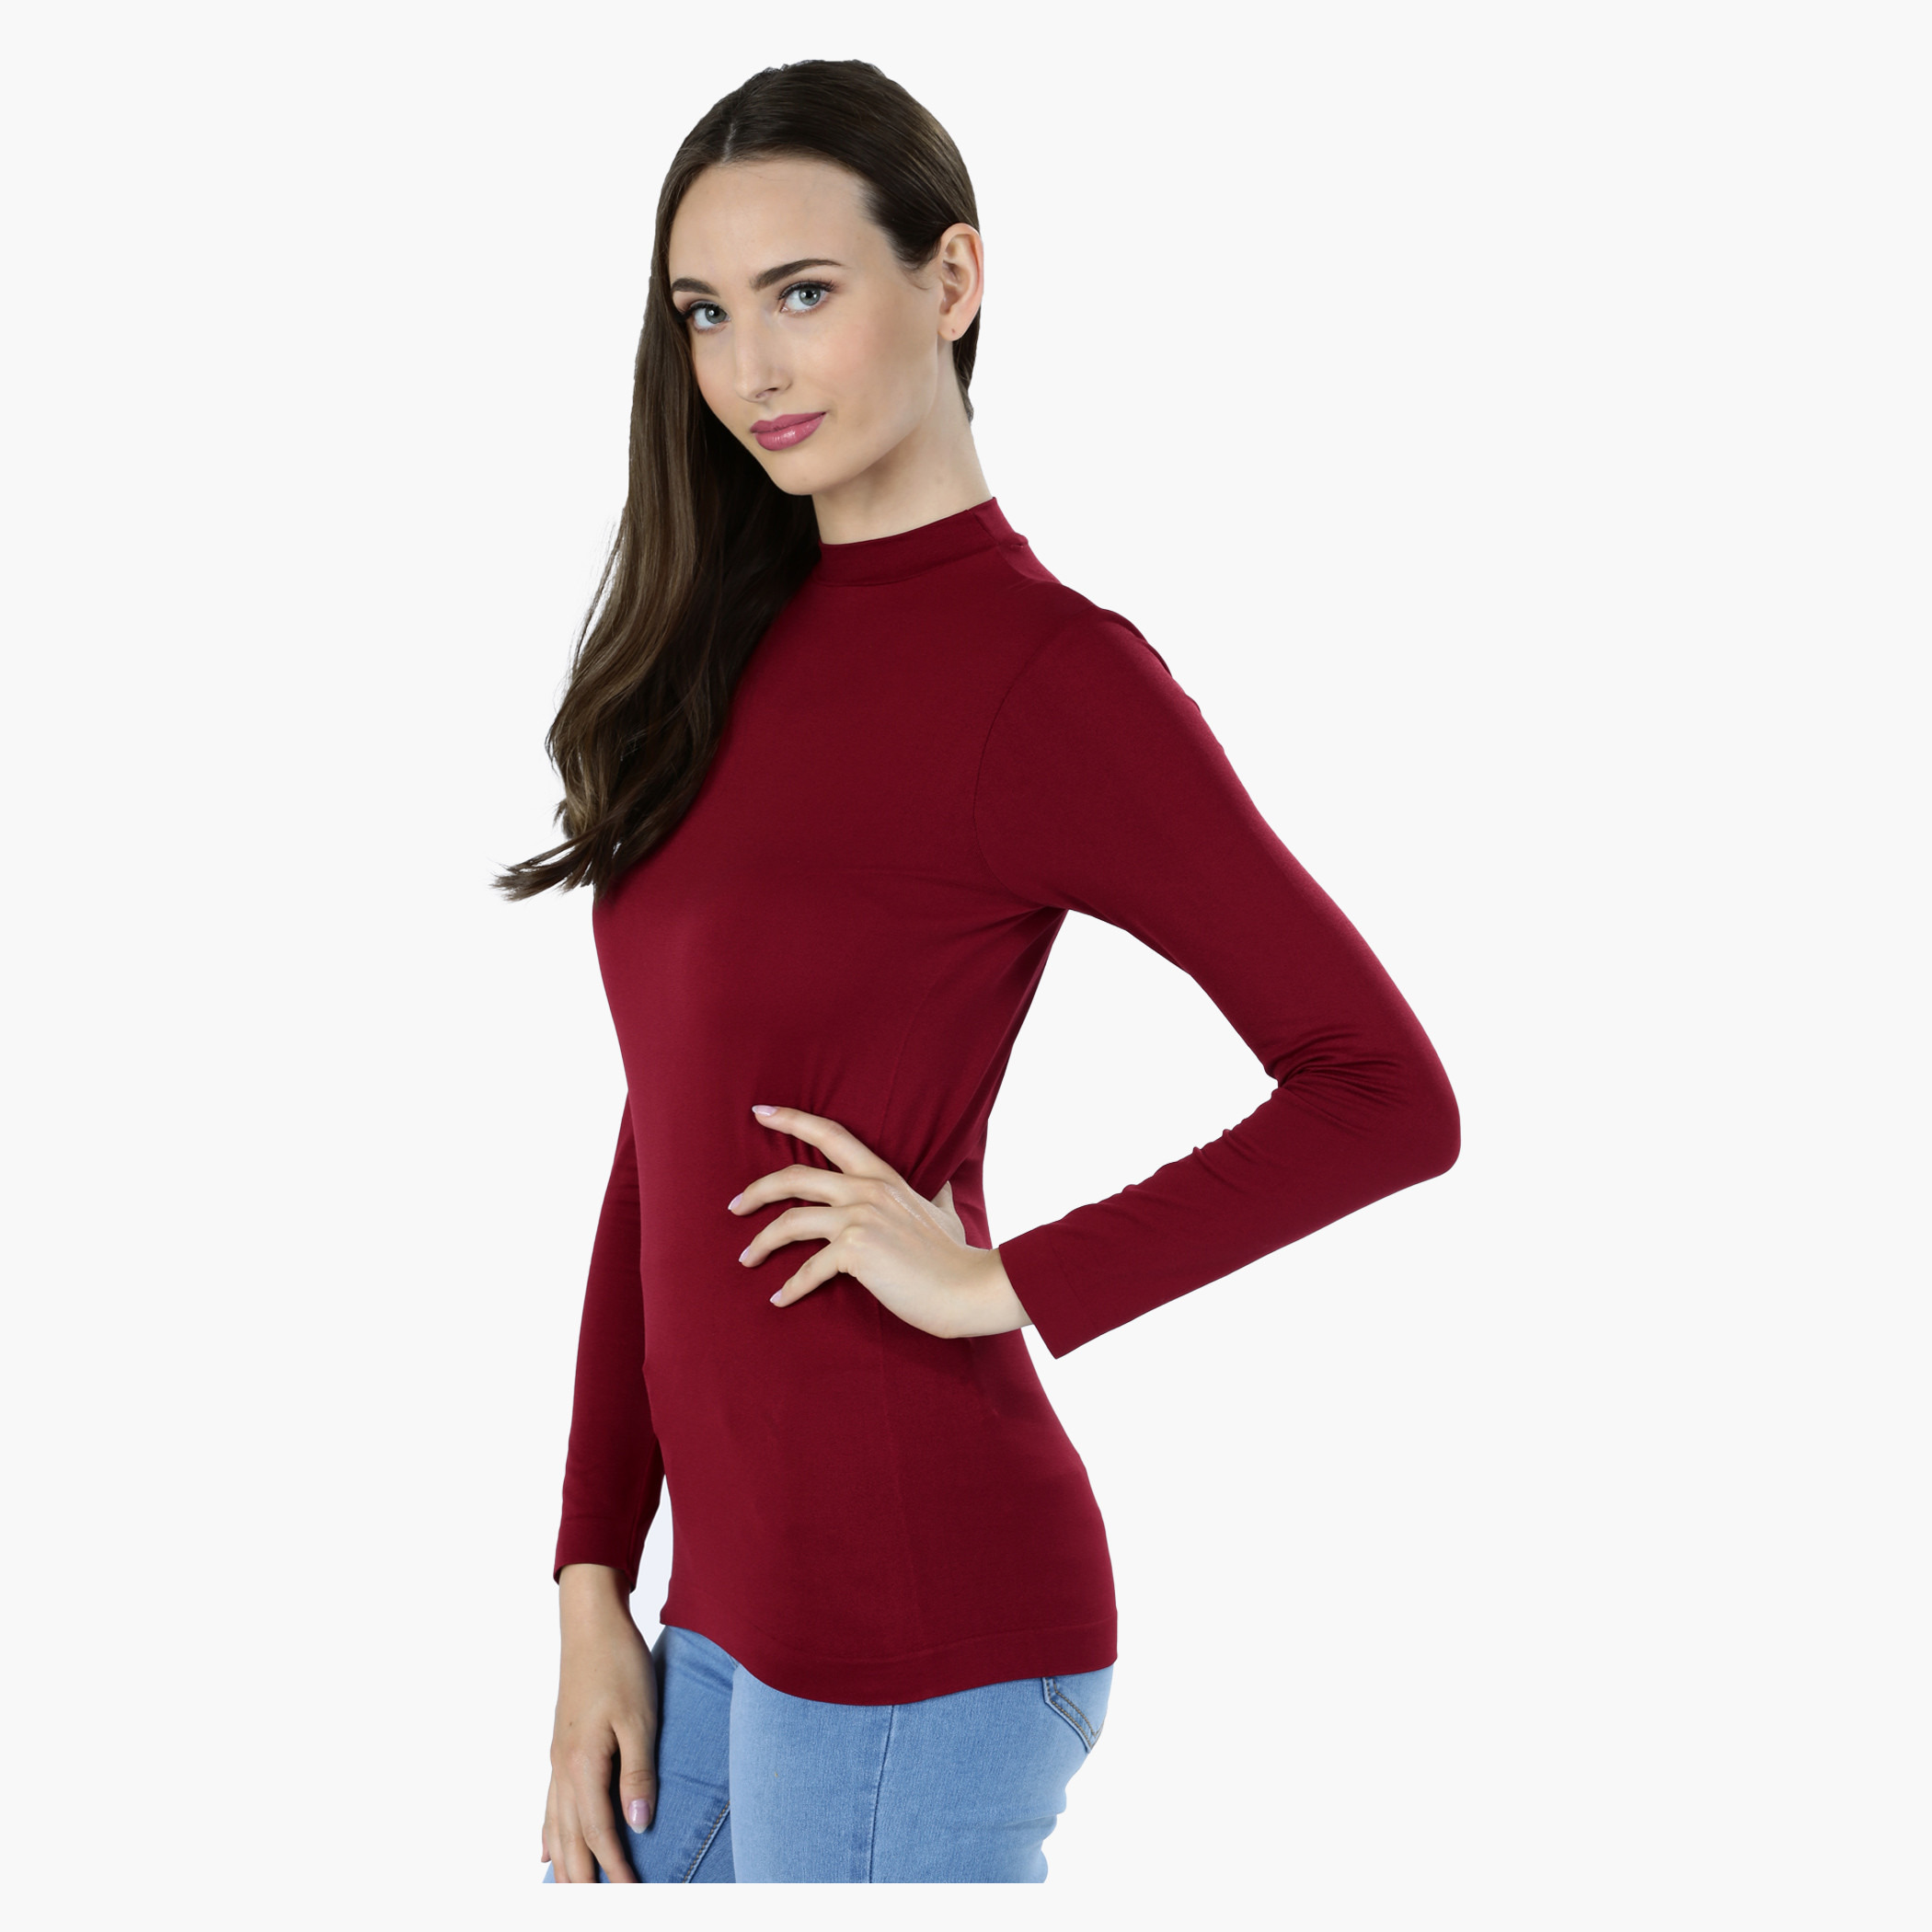 Shop High Neck T-Shirt with Long Sleeves Online | Max Qatar